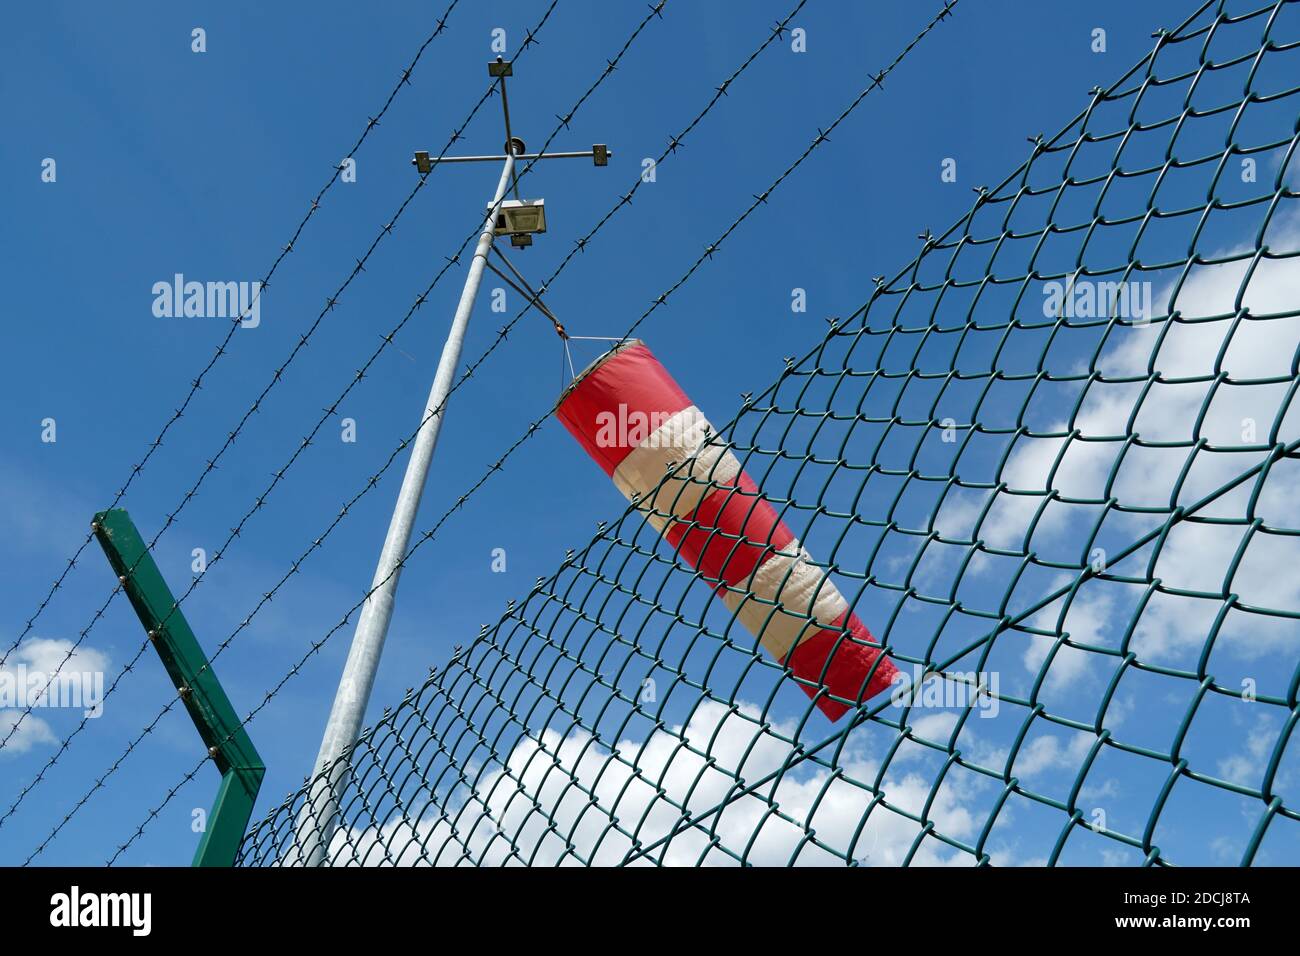 Wind direction indicator facilitates visual identification of direction and speed of wind at airports and heliports. Low angle view at the fence. Stock Photo